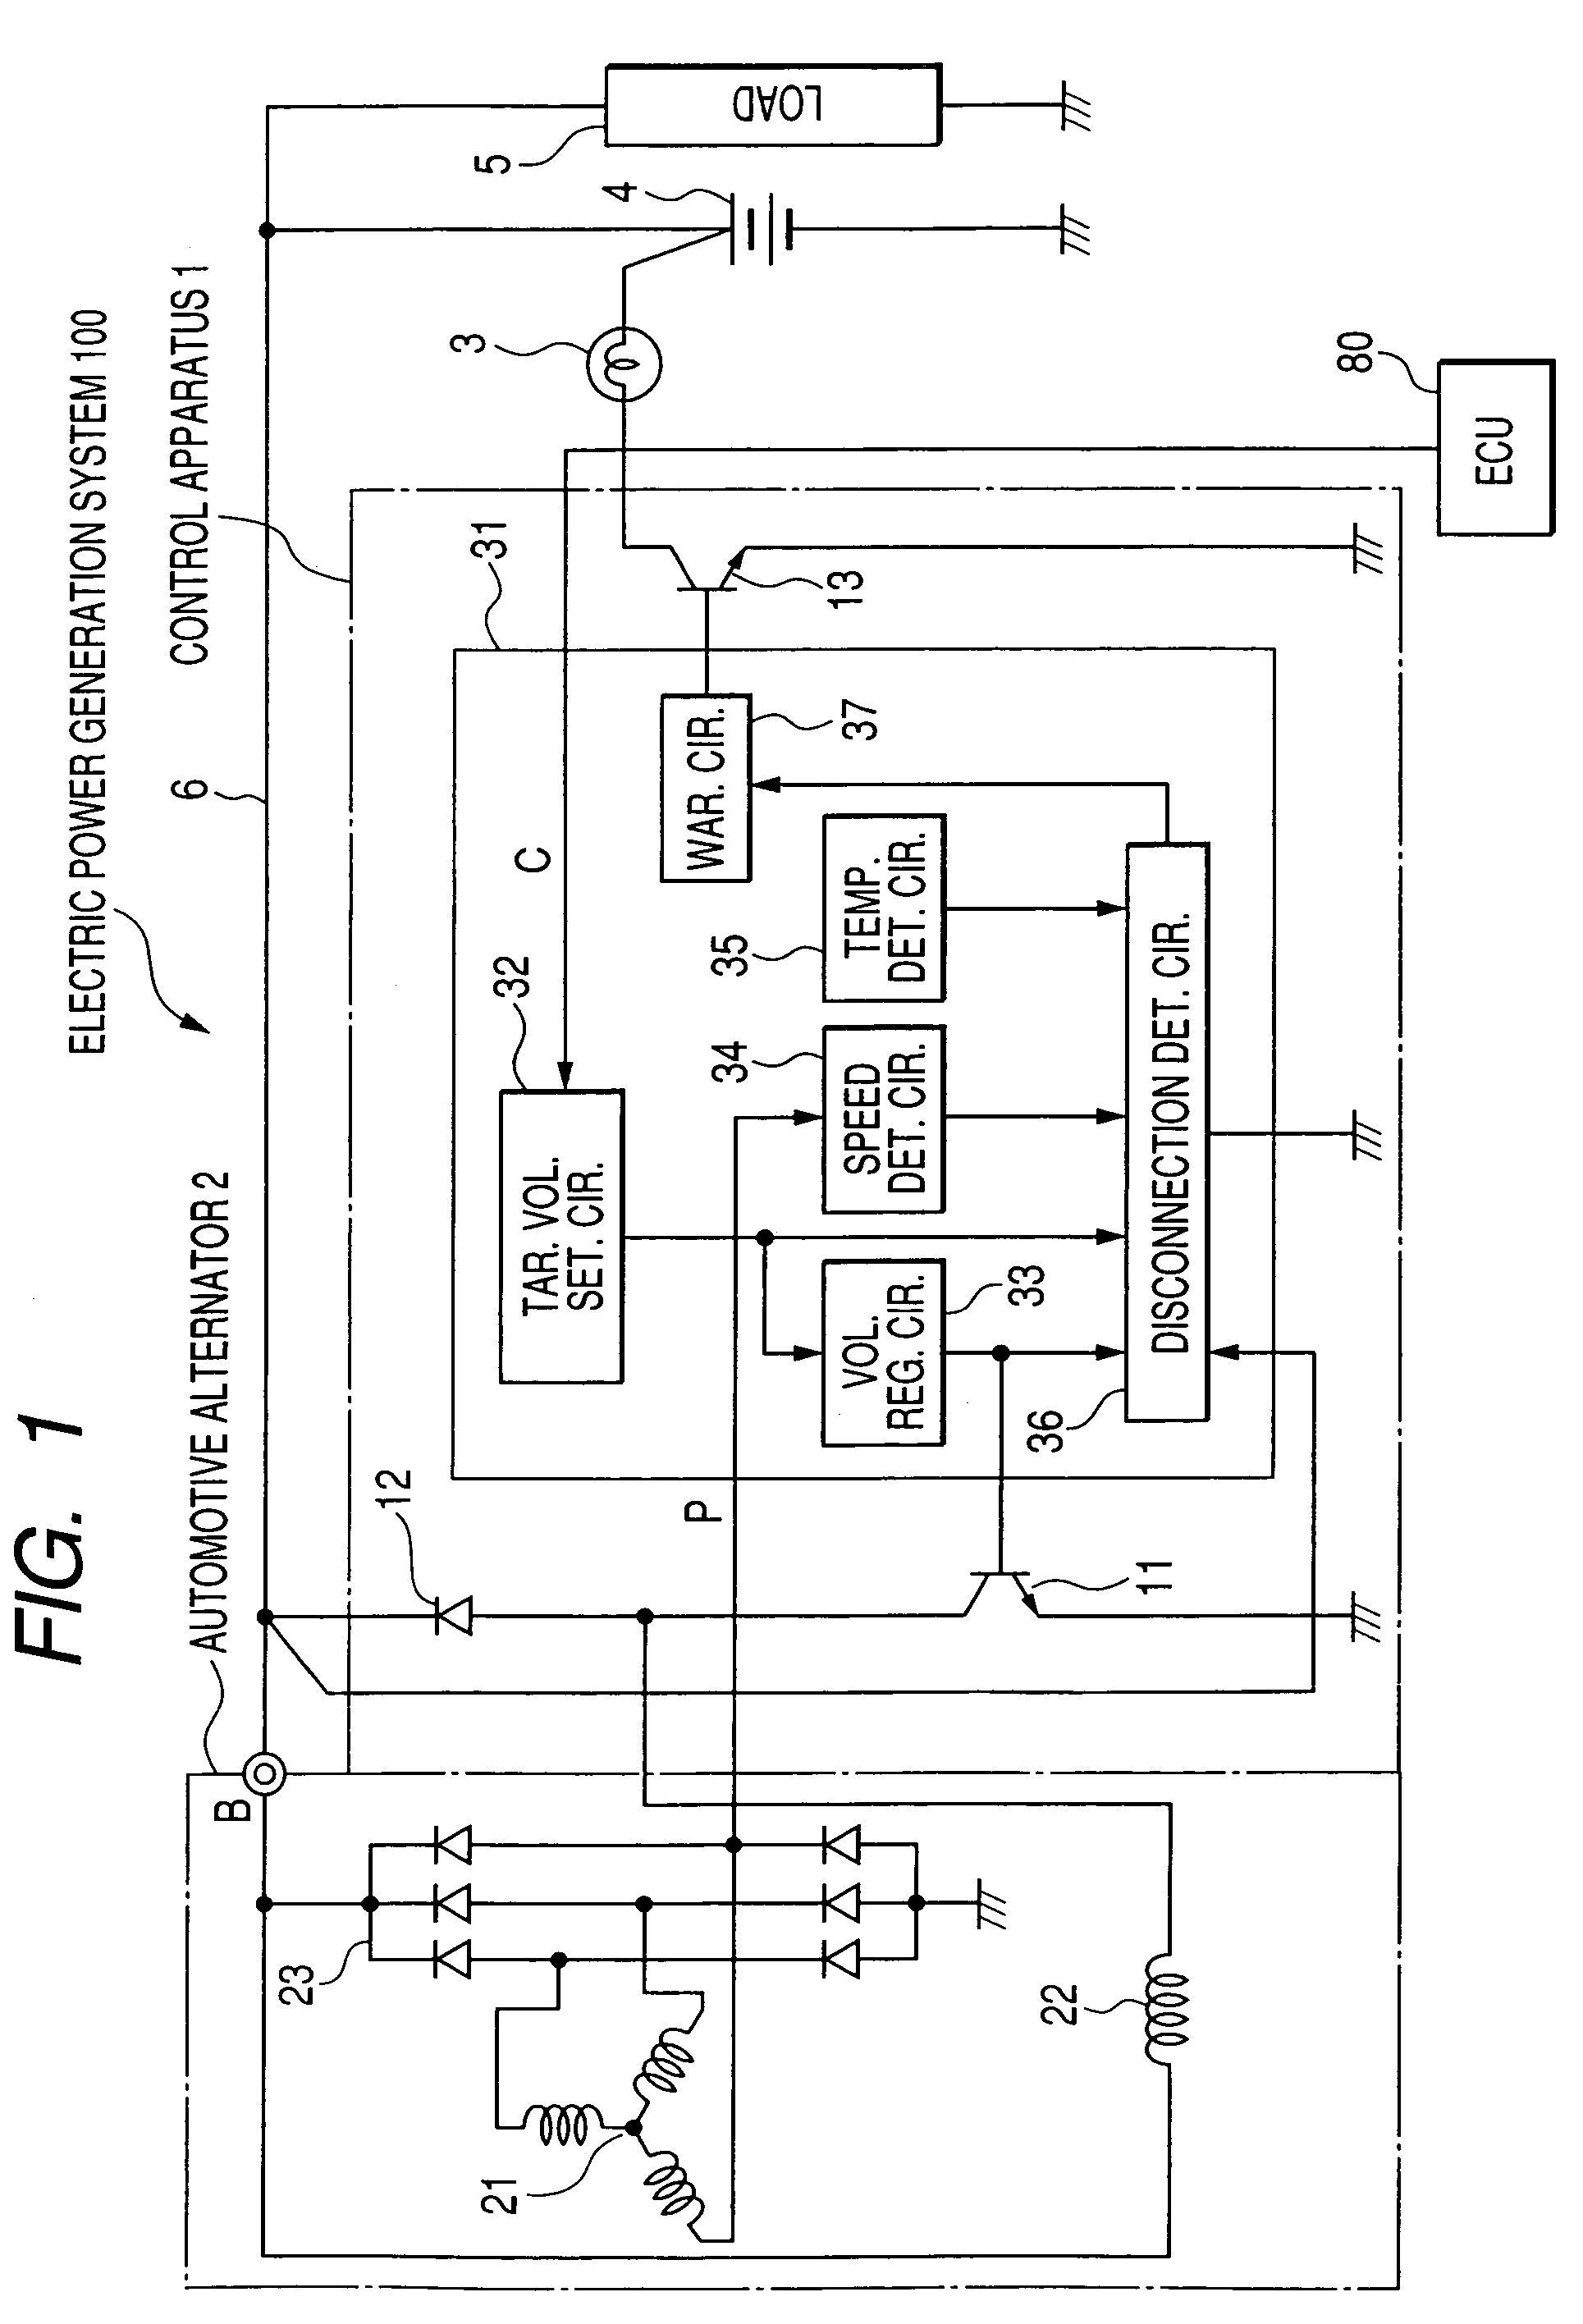 Control apparatus for automotive alternator having capability of reliably detecting disconnection between alternator and battery